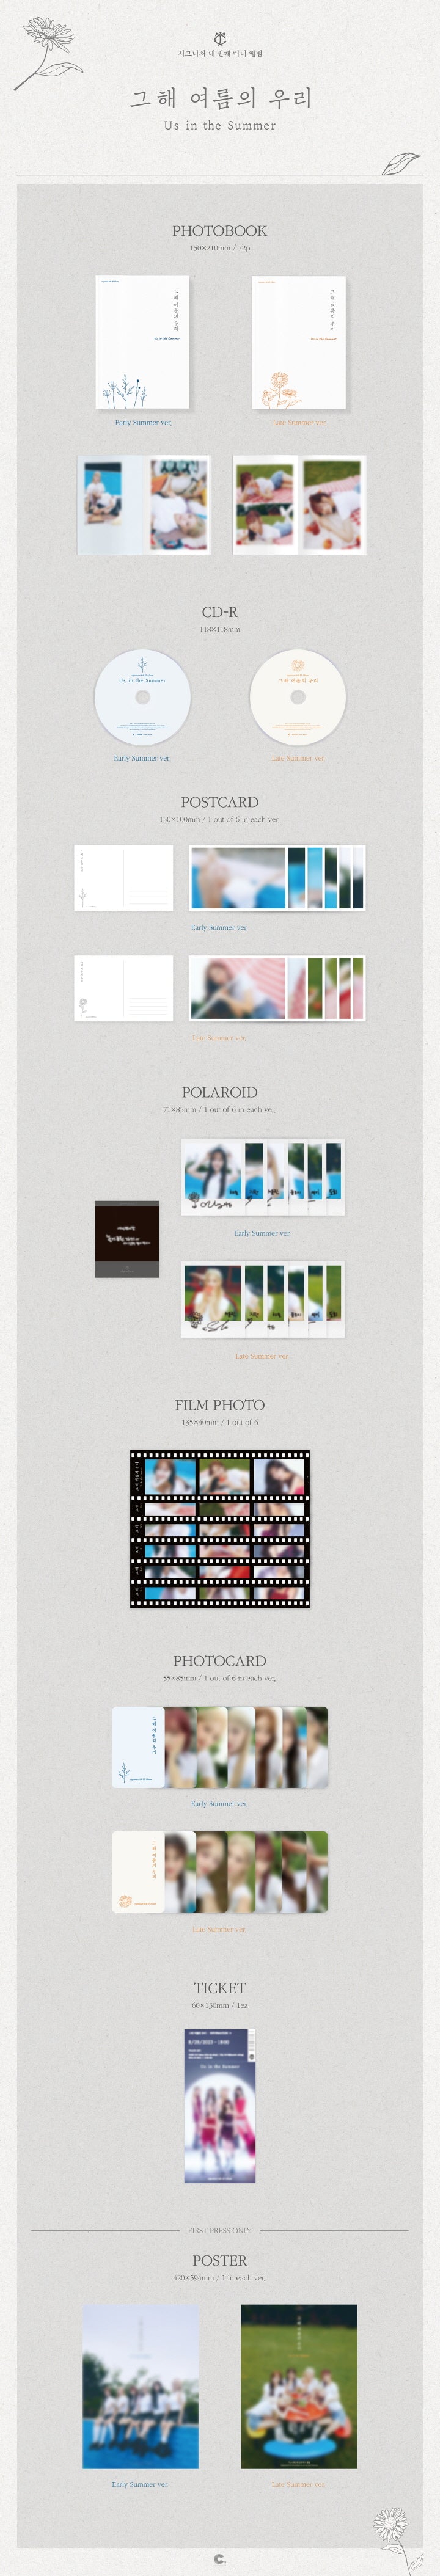 1 CD
1 Photo Book (72 pages)
1 Postcard (random out of 6 types)
1 Polaroid (random out of 6 types)
1 Film Photo (random ou...